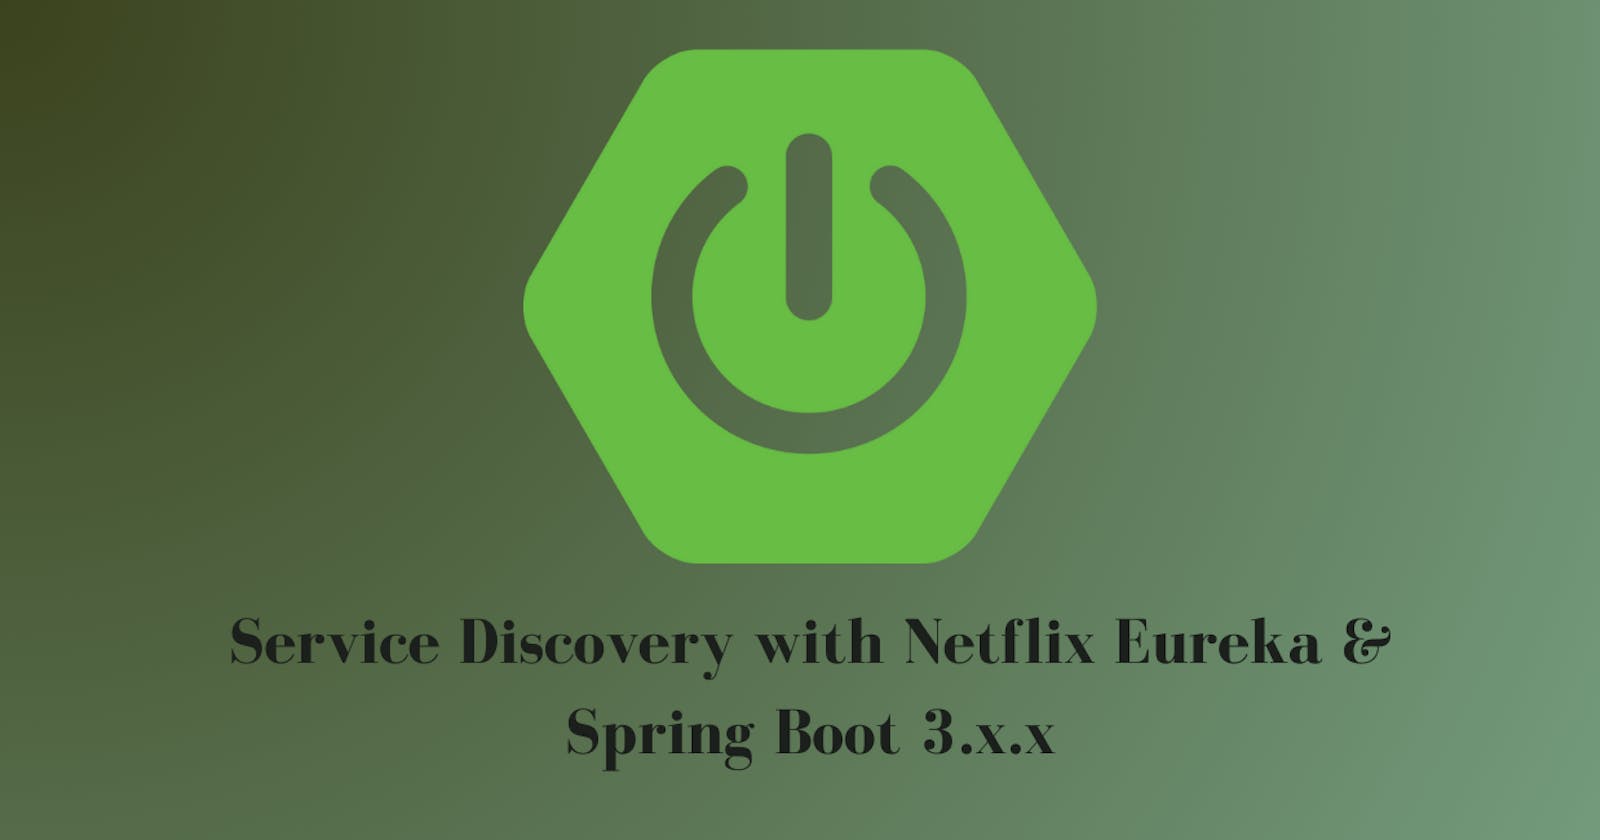 Spring Cloud - Service Discovery with Netflix Eureka & Spring Boot 3.x.x